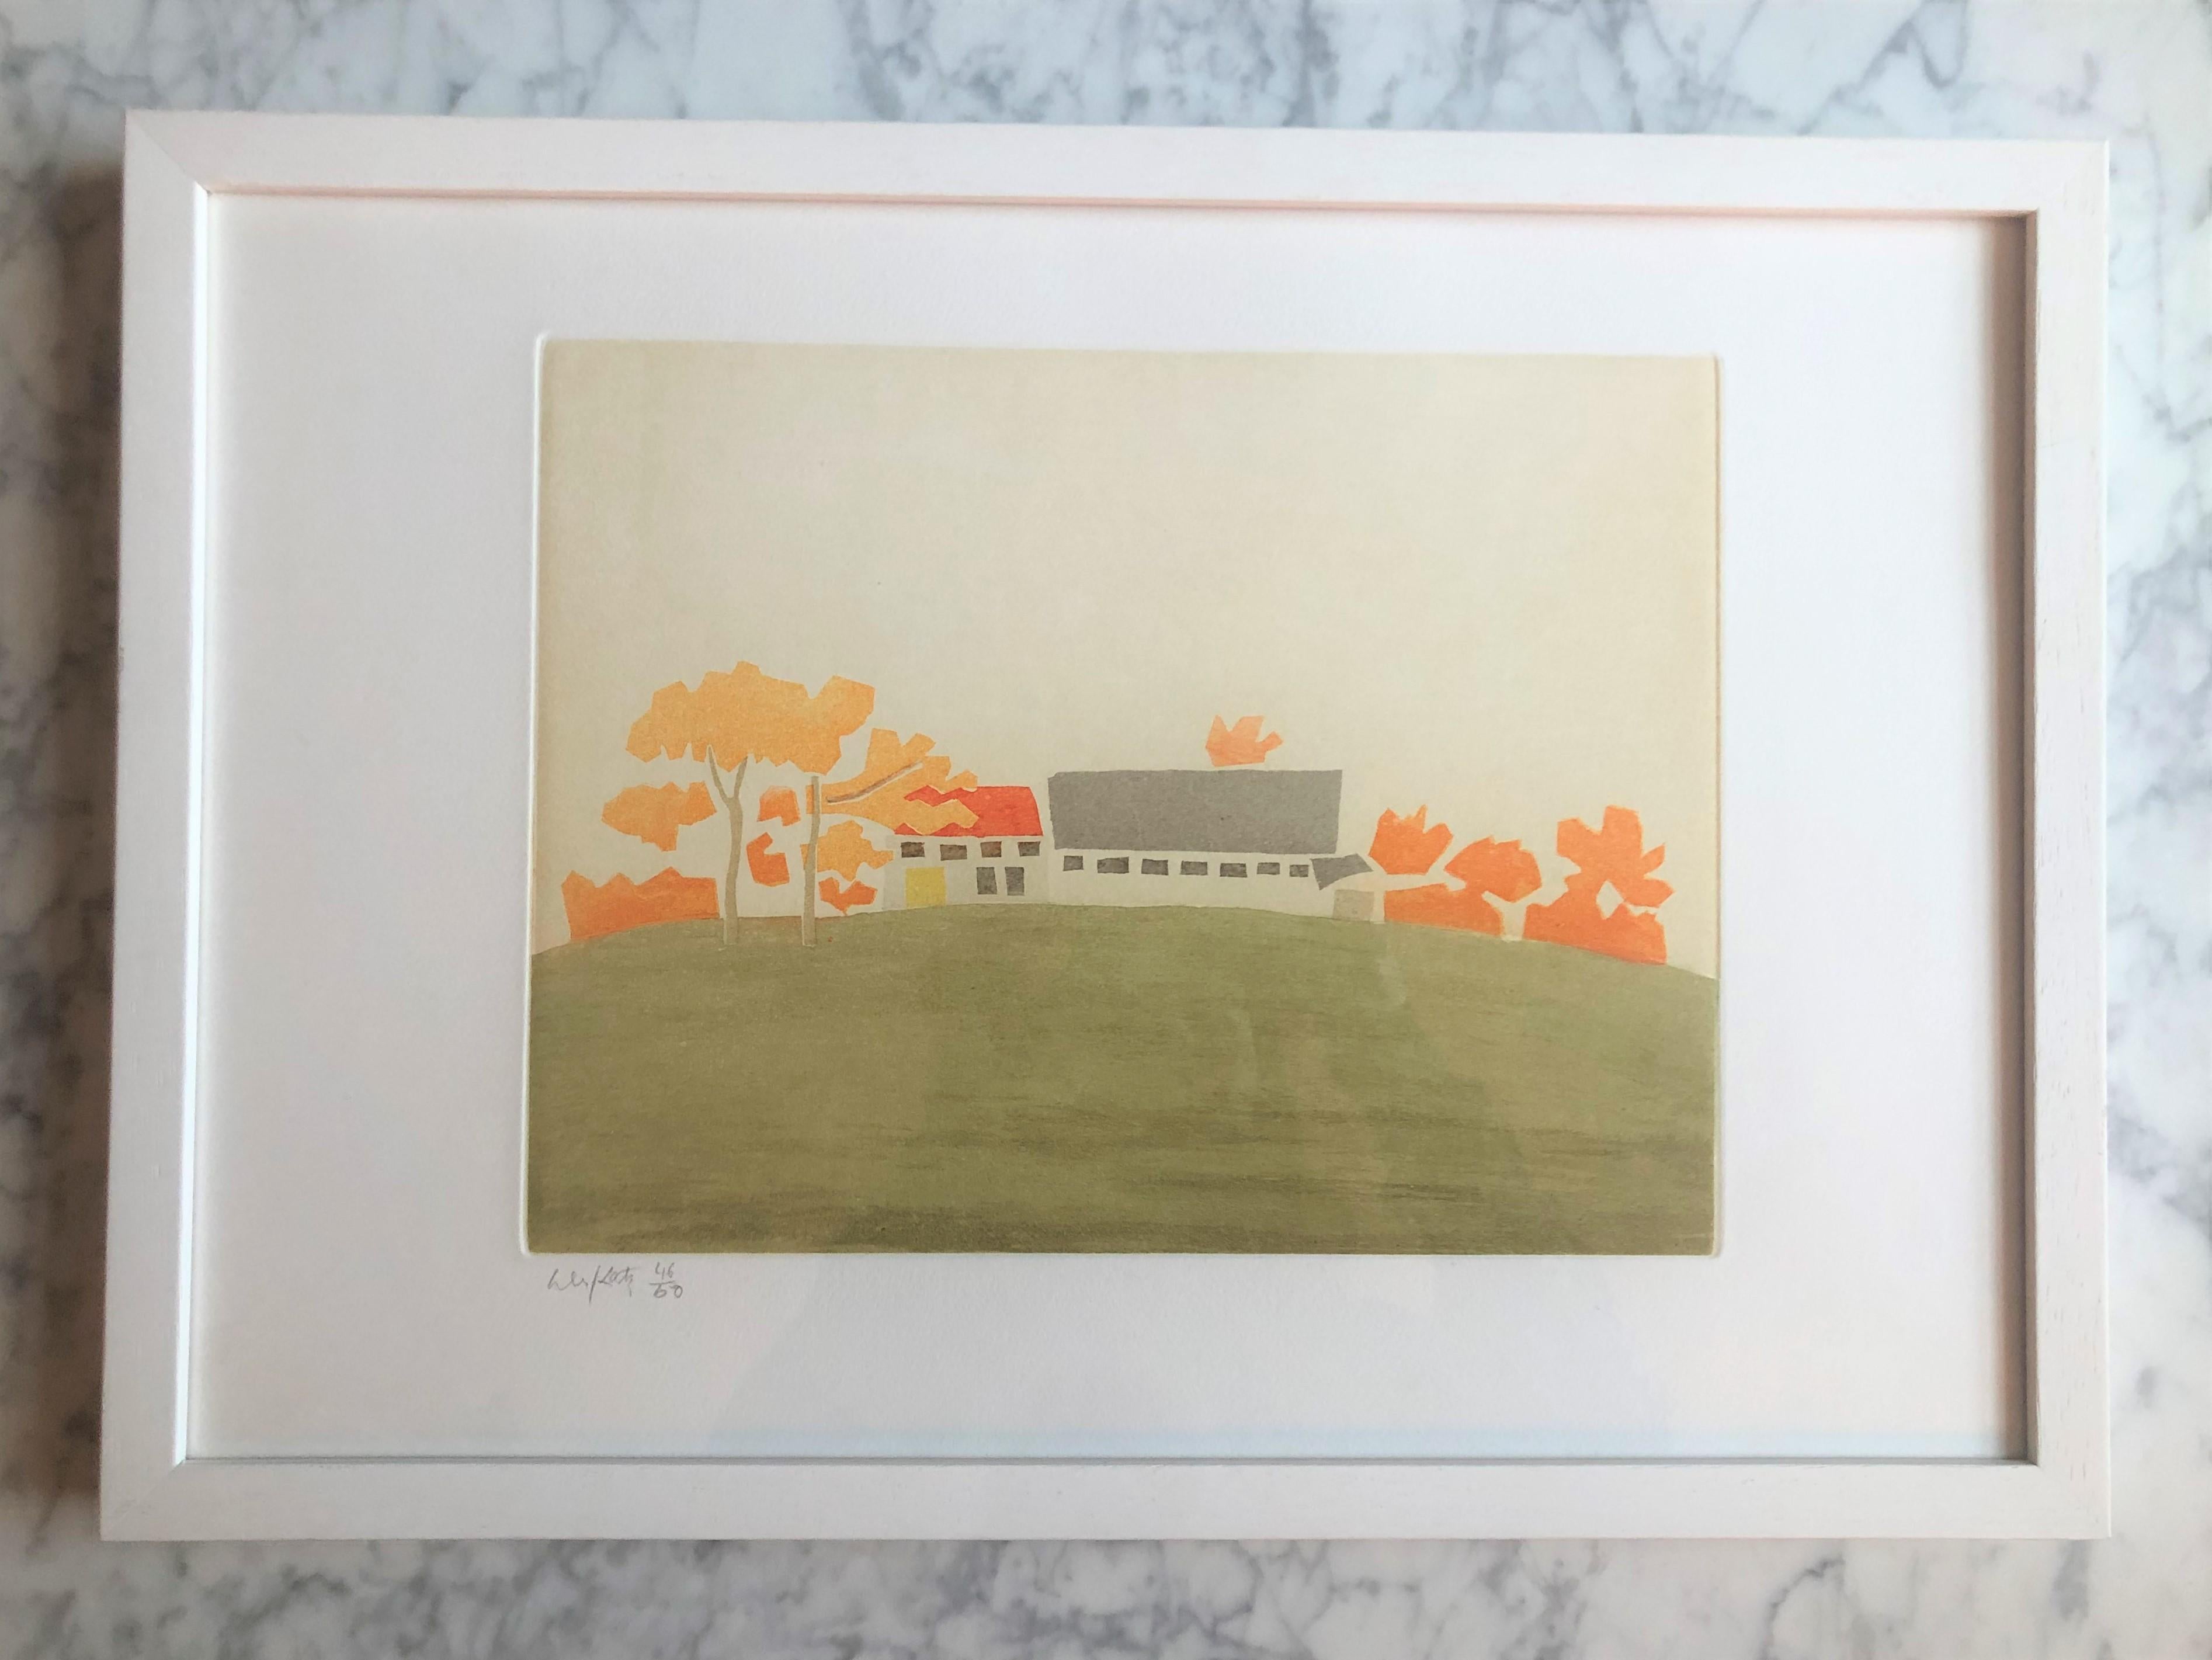 ALEX KATZ (1927-Present)

This beautiful Alex Katz 'Small Cuts House and Barn' is a 2008 aquatint in color from a small edition size of 60. This piece is numbered 46/60 and hand signed in pencil by the artist on the bottom left corner of the work. 
